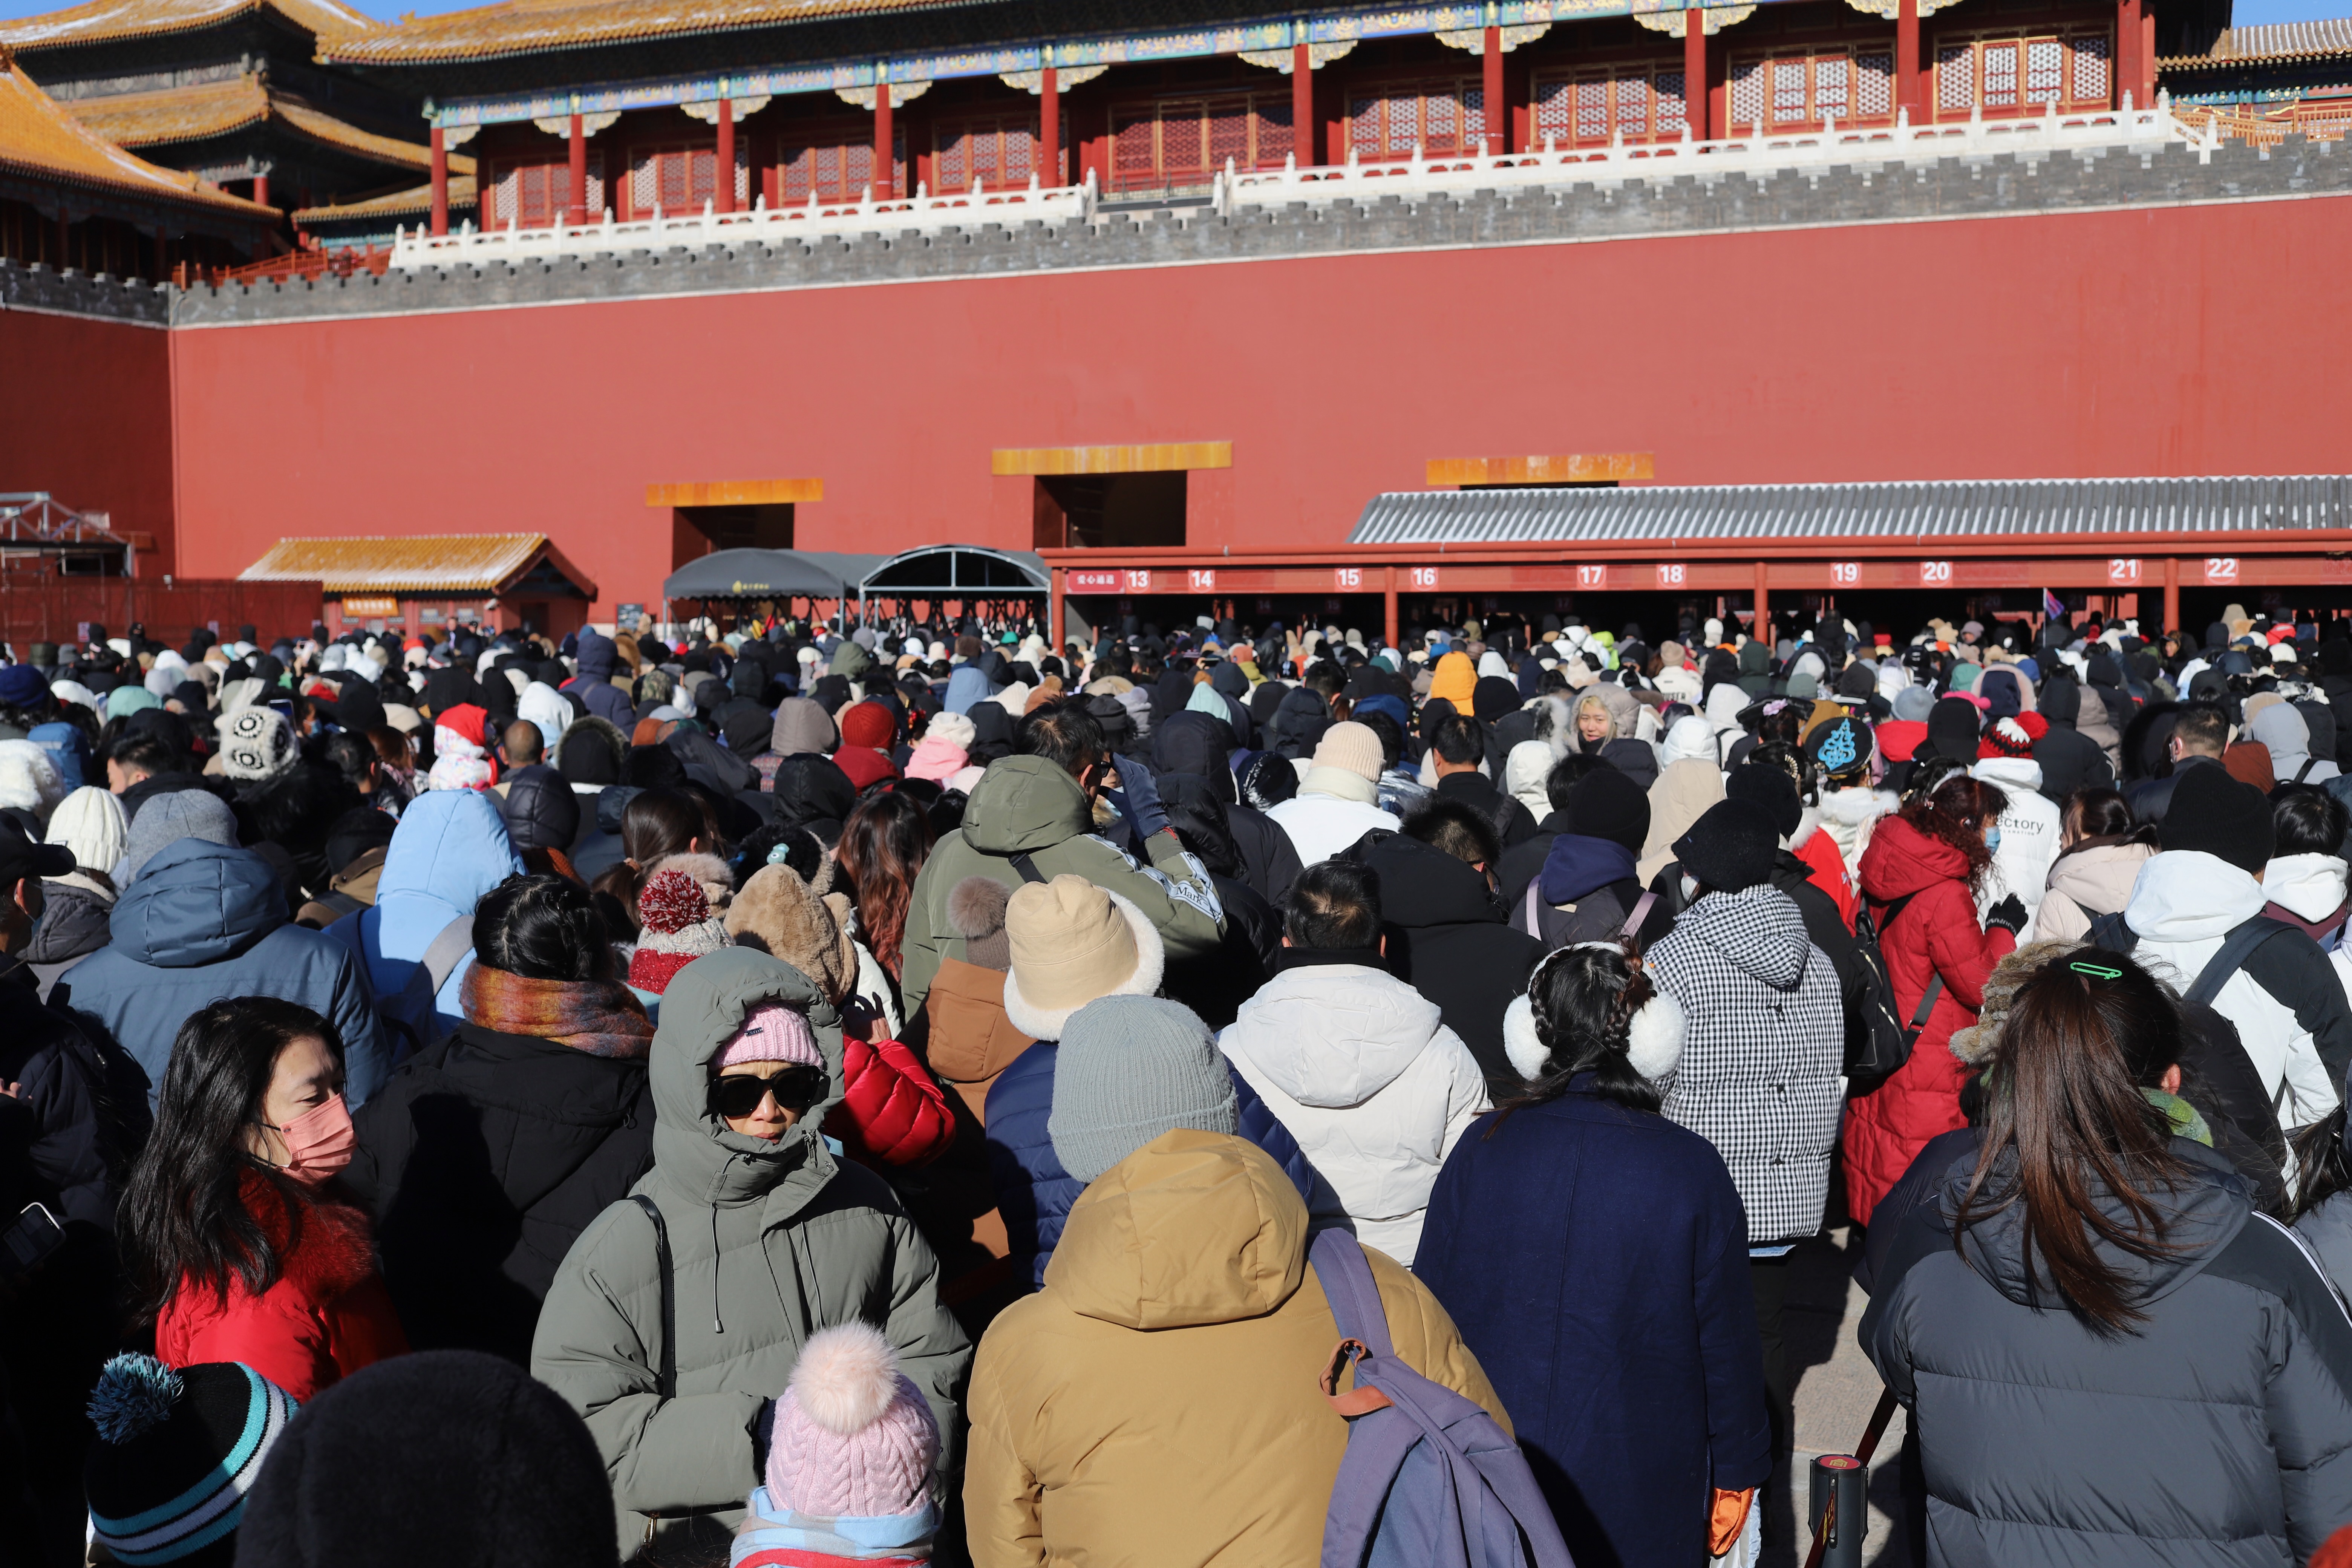 Even whilst queuing to enter The Forbidden CIty, you start to get a sense of how big it is.